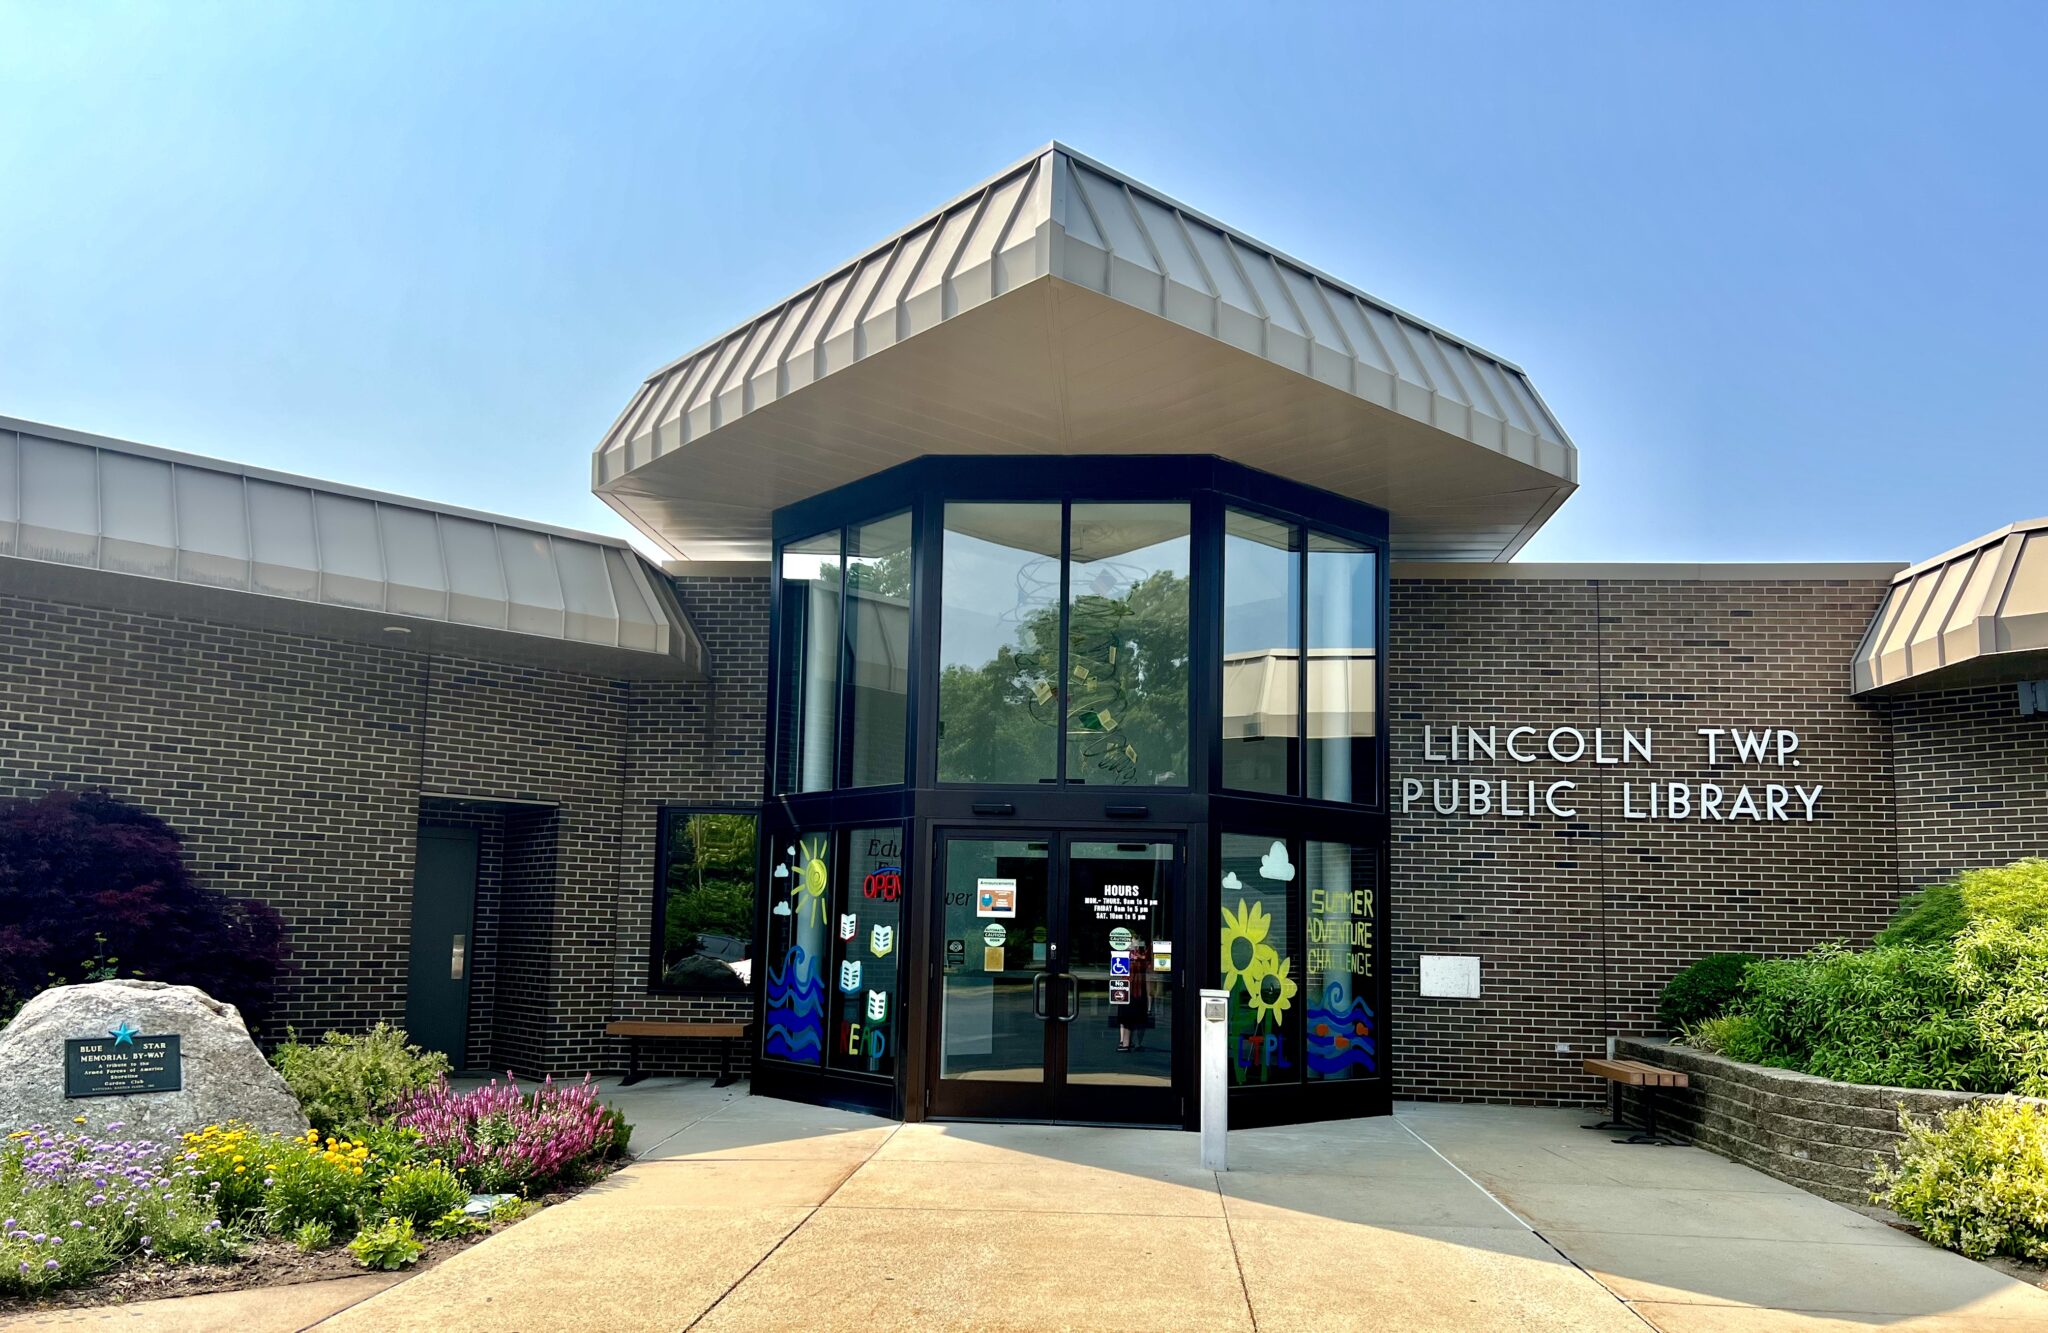 Lincoln Township Public Library